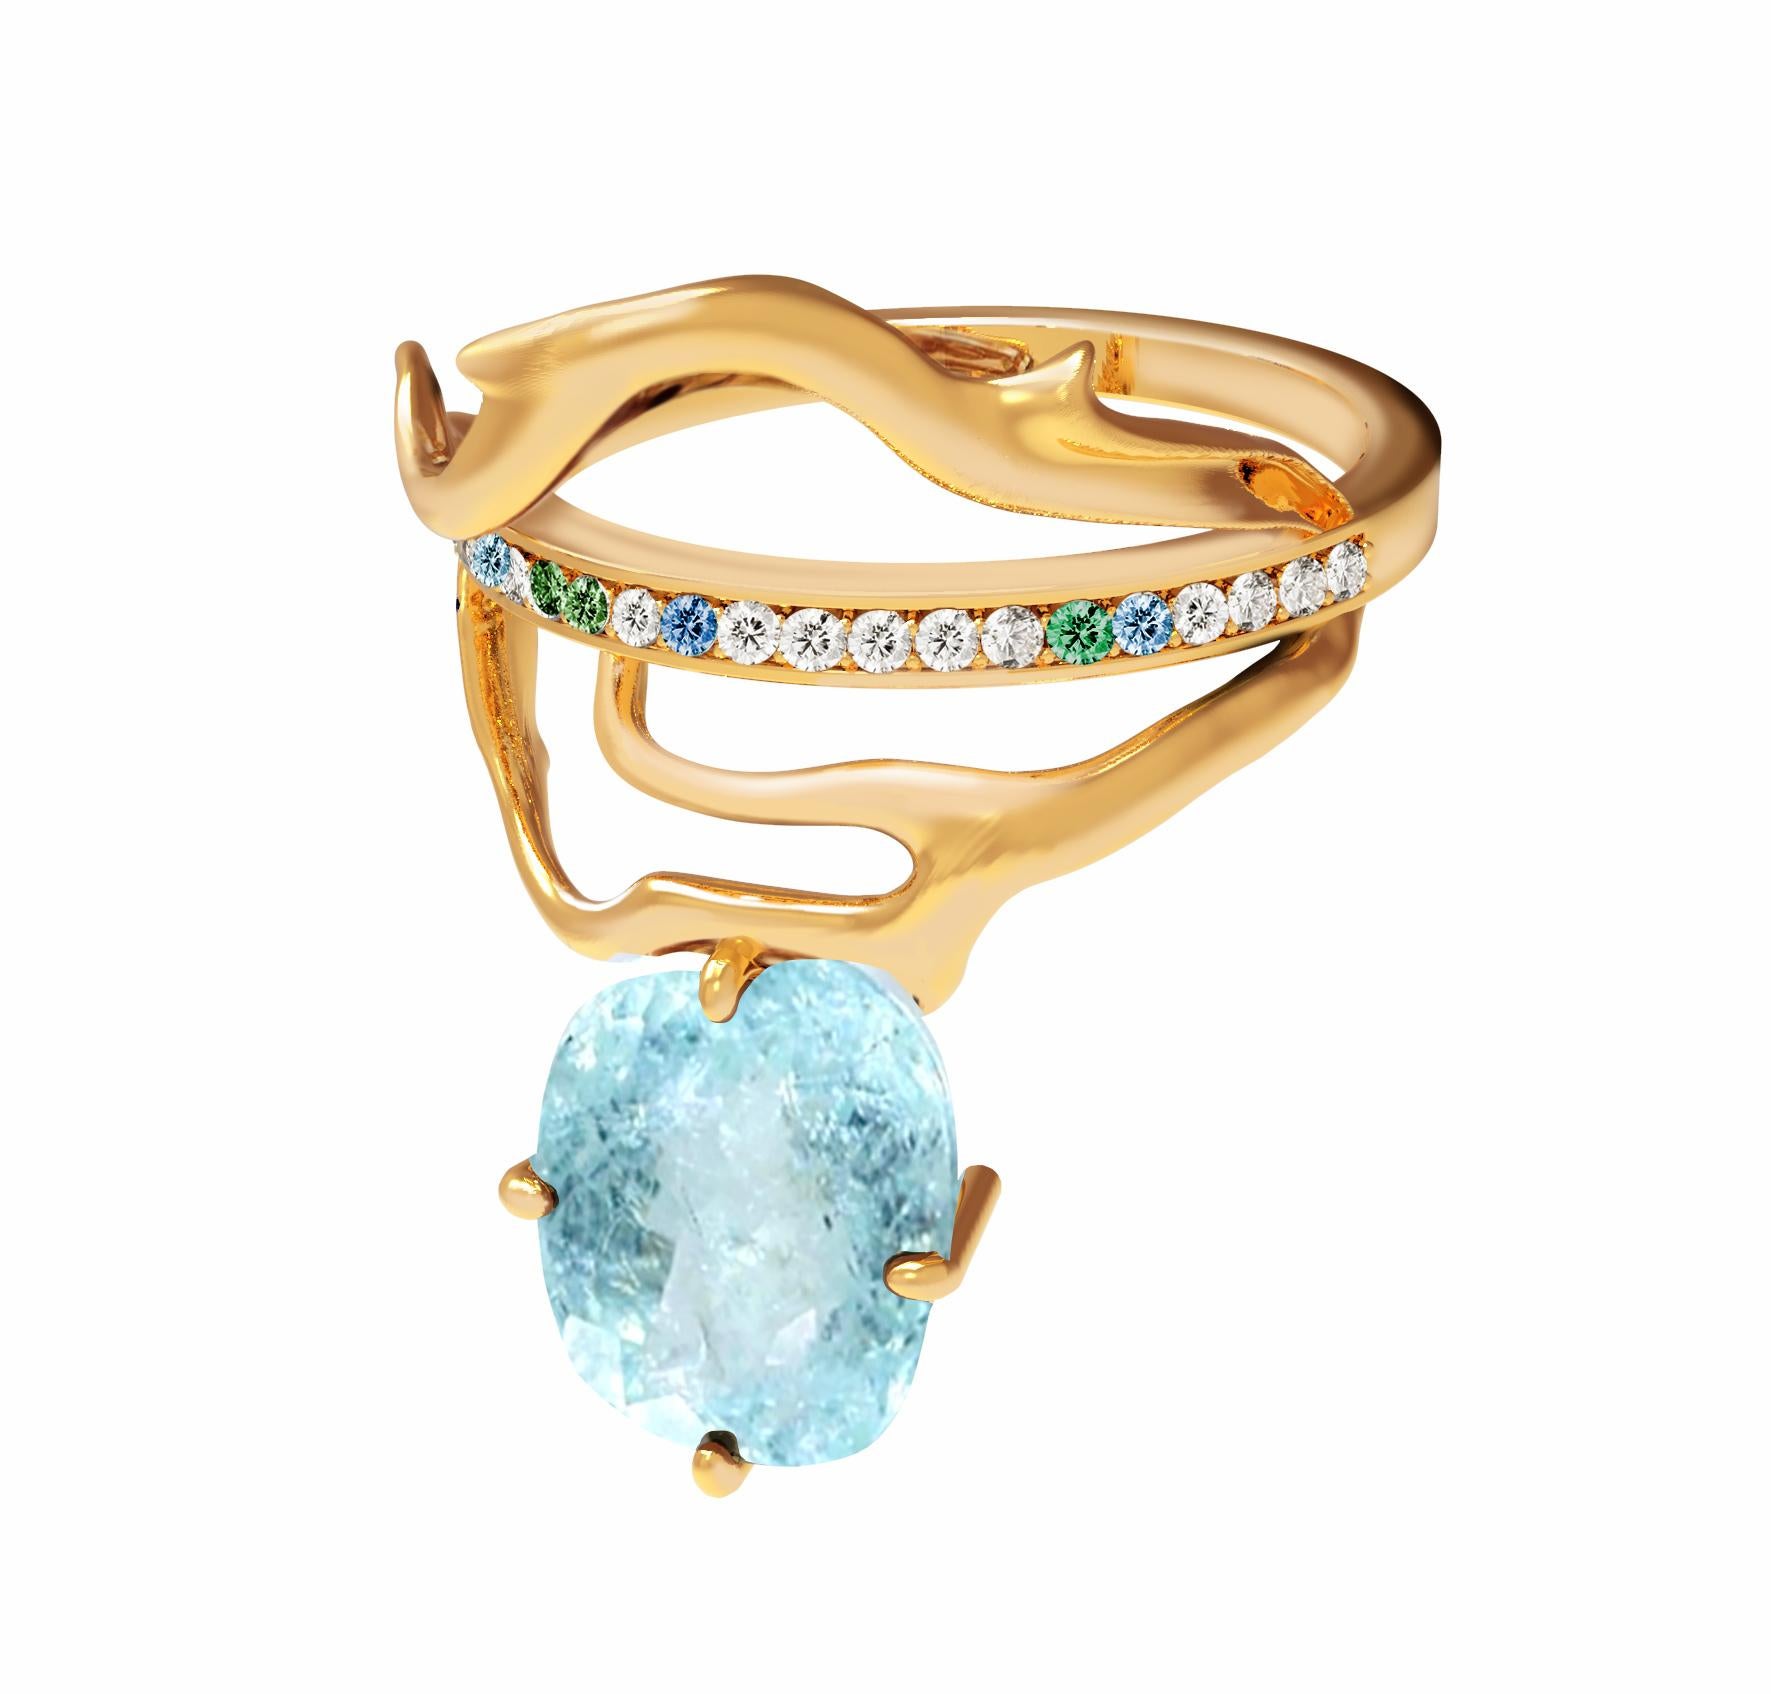 An unusual form makes this Tibetan 18 karat yellow gold contemporary ring an art object. It is encrusted with: emeralds, blue sapphires, diamonds, and oval cut paraiba tourmaline  (neon copper bearing, 2,4 carats, blue with inclusions). Size is